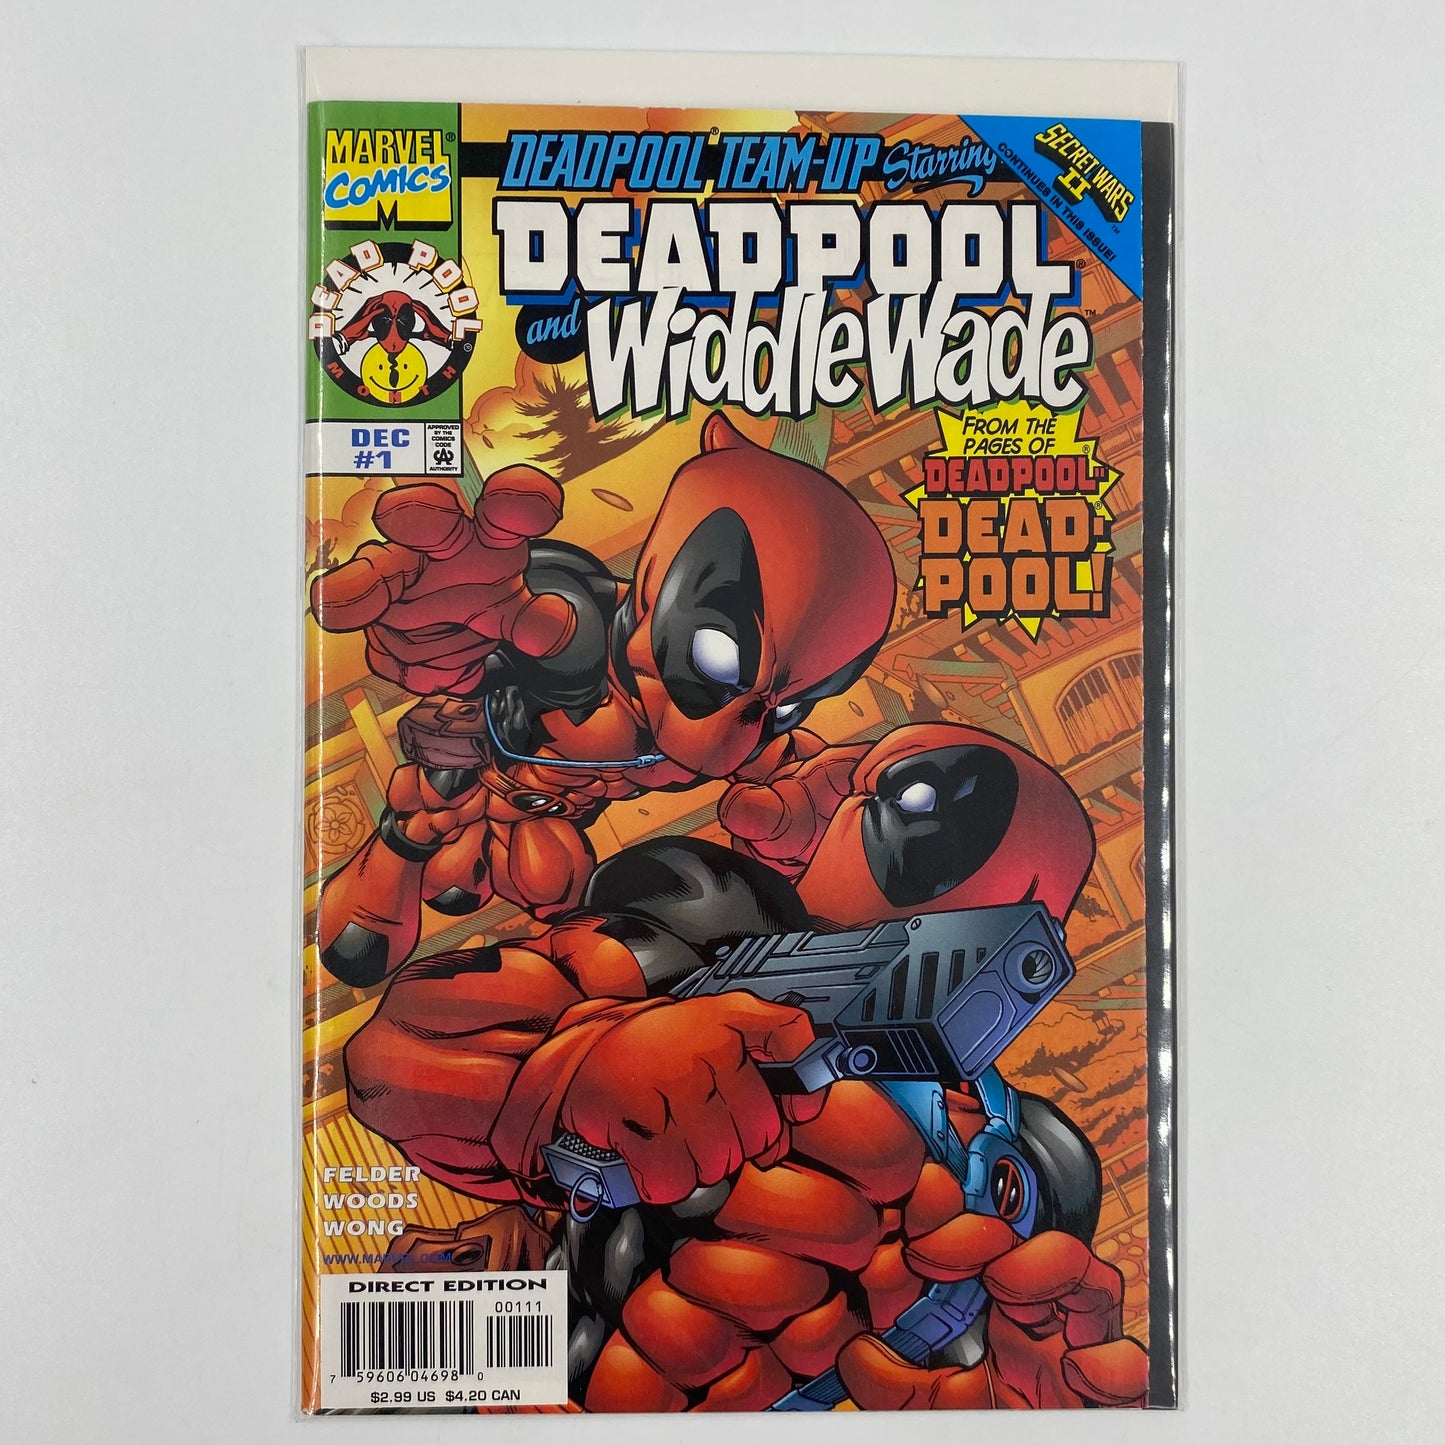 Deadpool Team-Up Starring Deadpool and Widdle Wade #1 (1998) Marvel